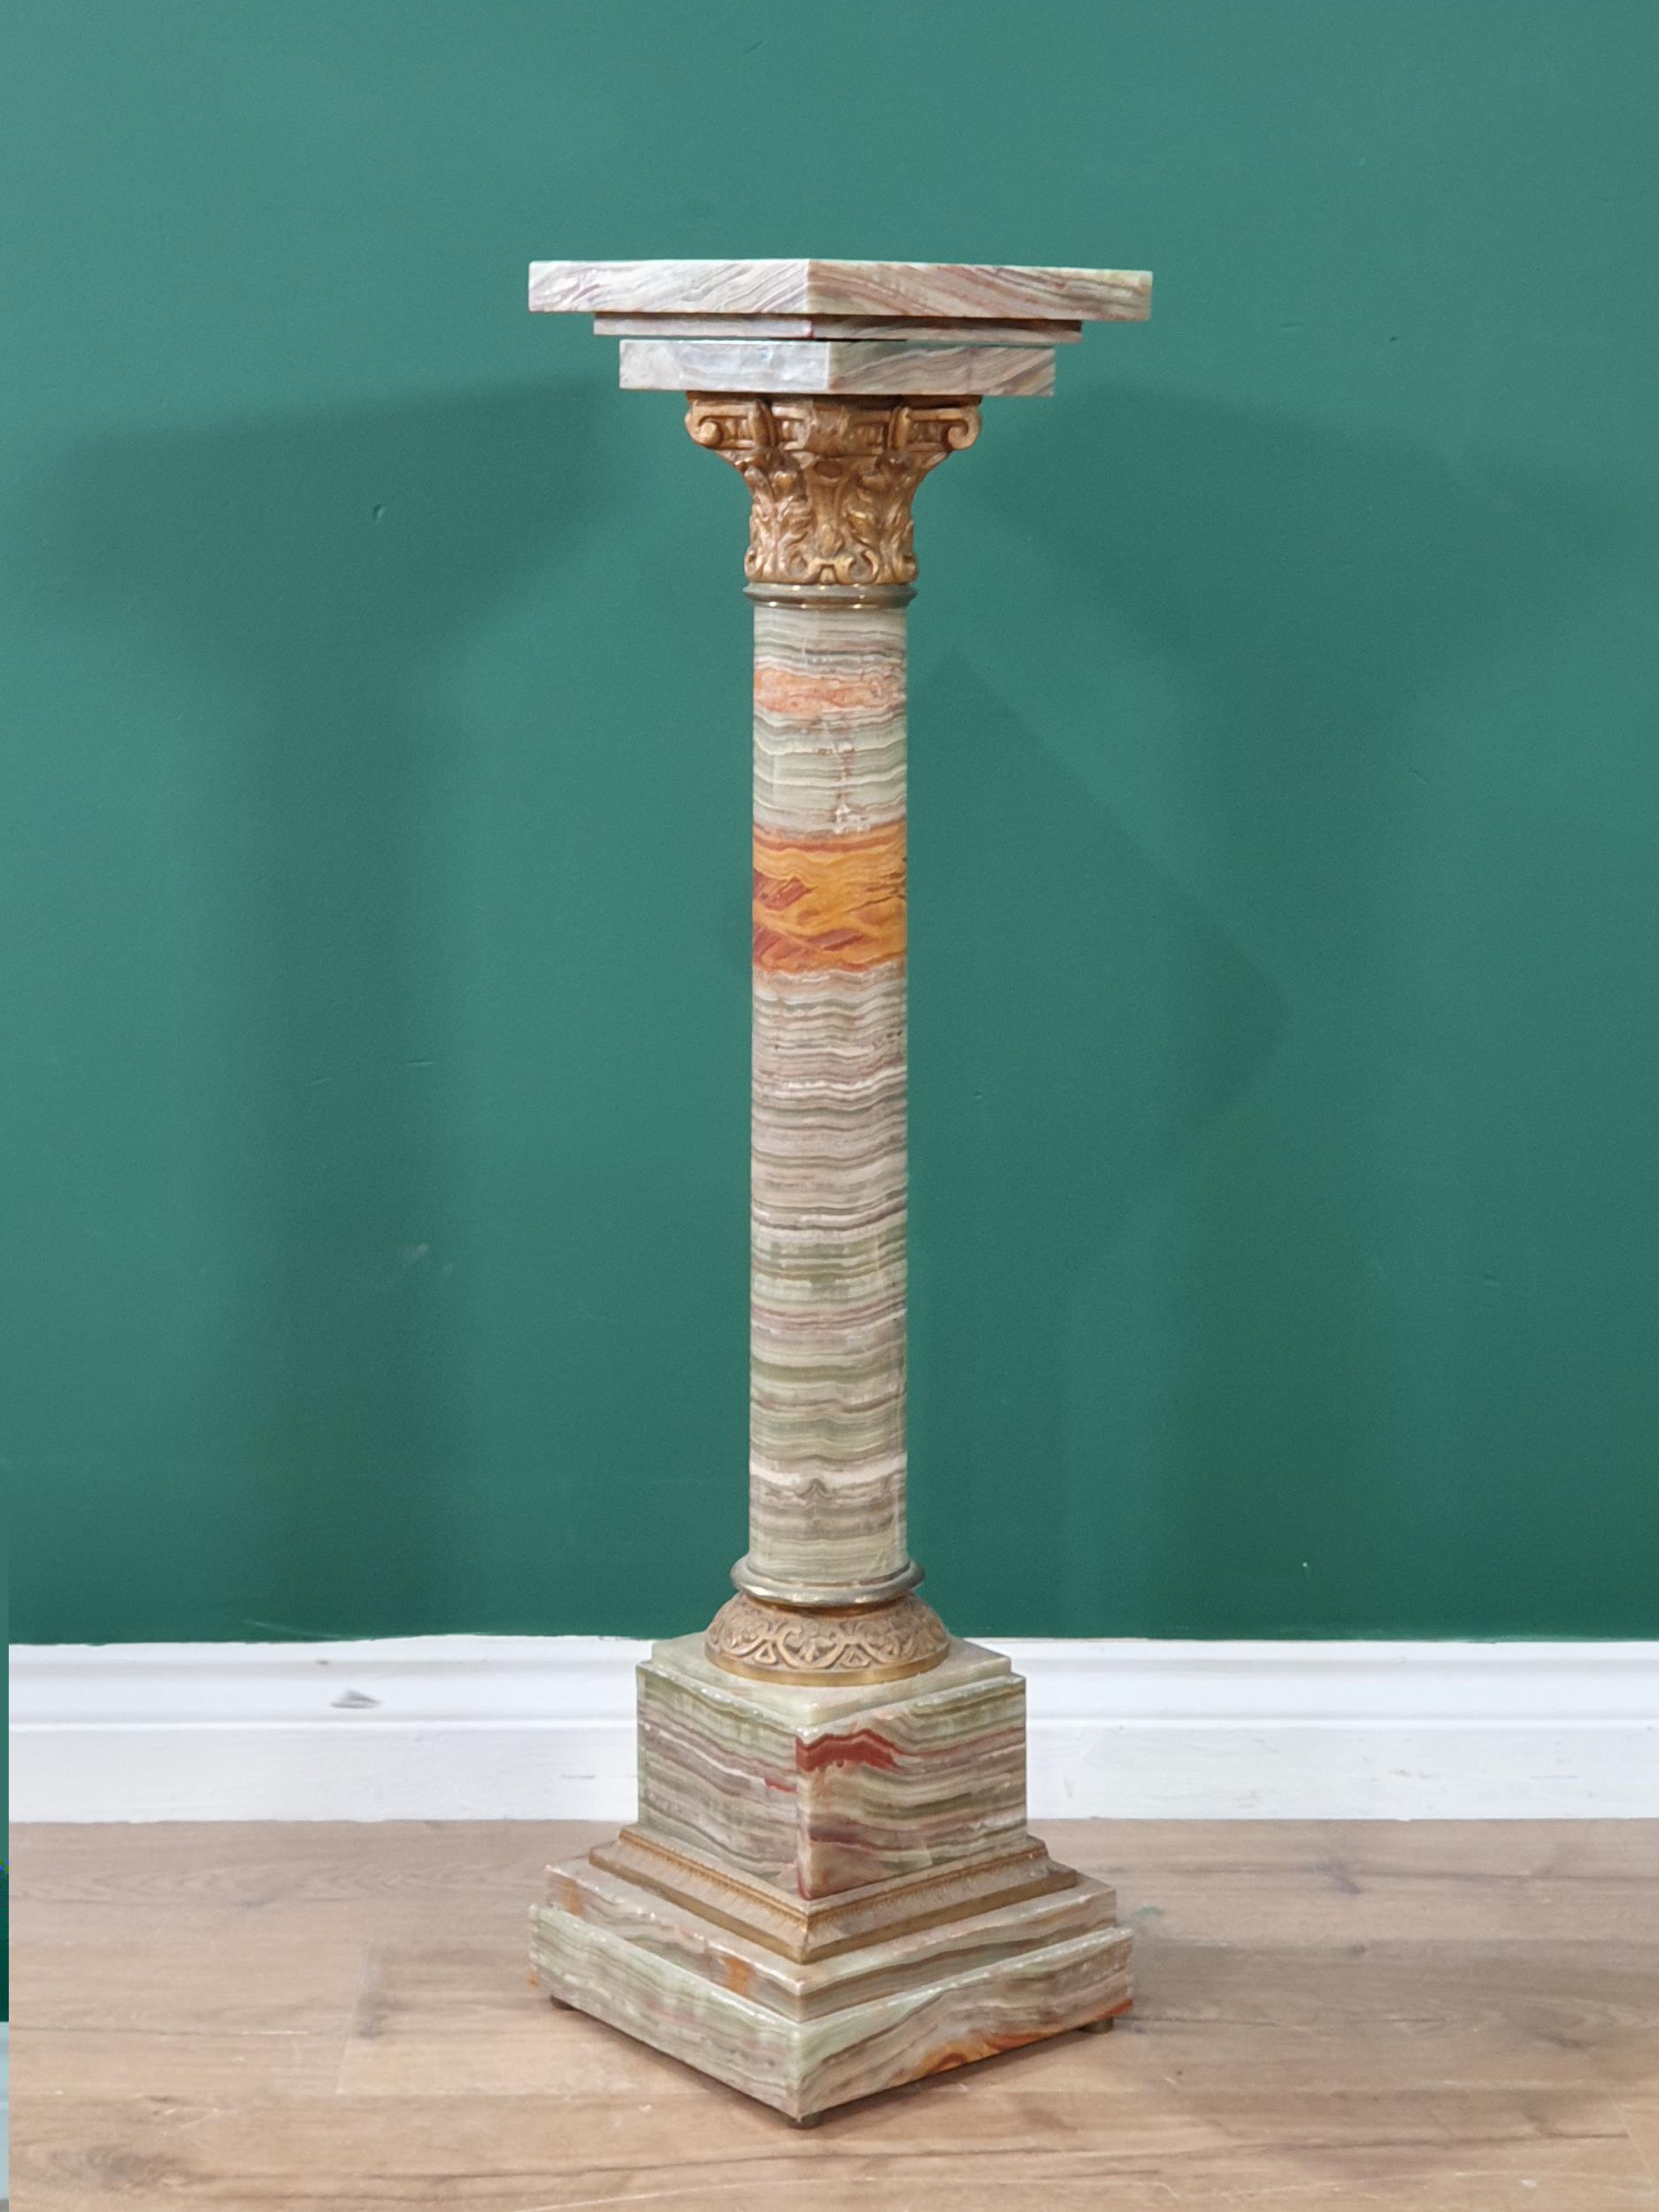 A green and variegated marble Pedestal with square top on cylindrical column, gilt metal capital and